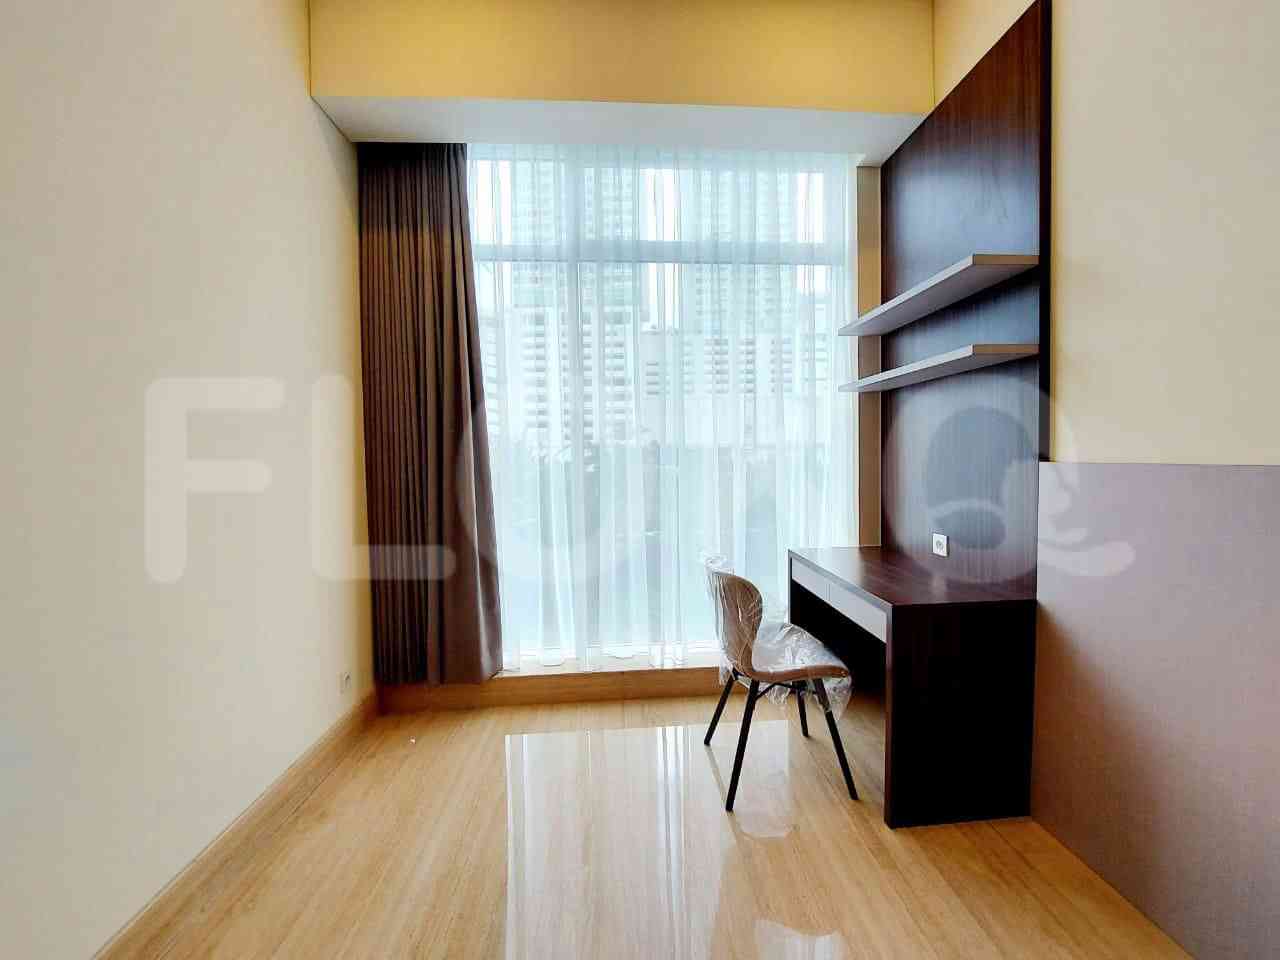 2 Bedroom on 17th Floor for Rent in South Hills Apartment - fkuc03 3